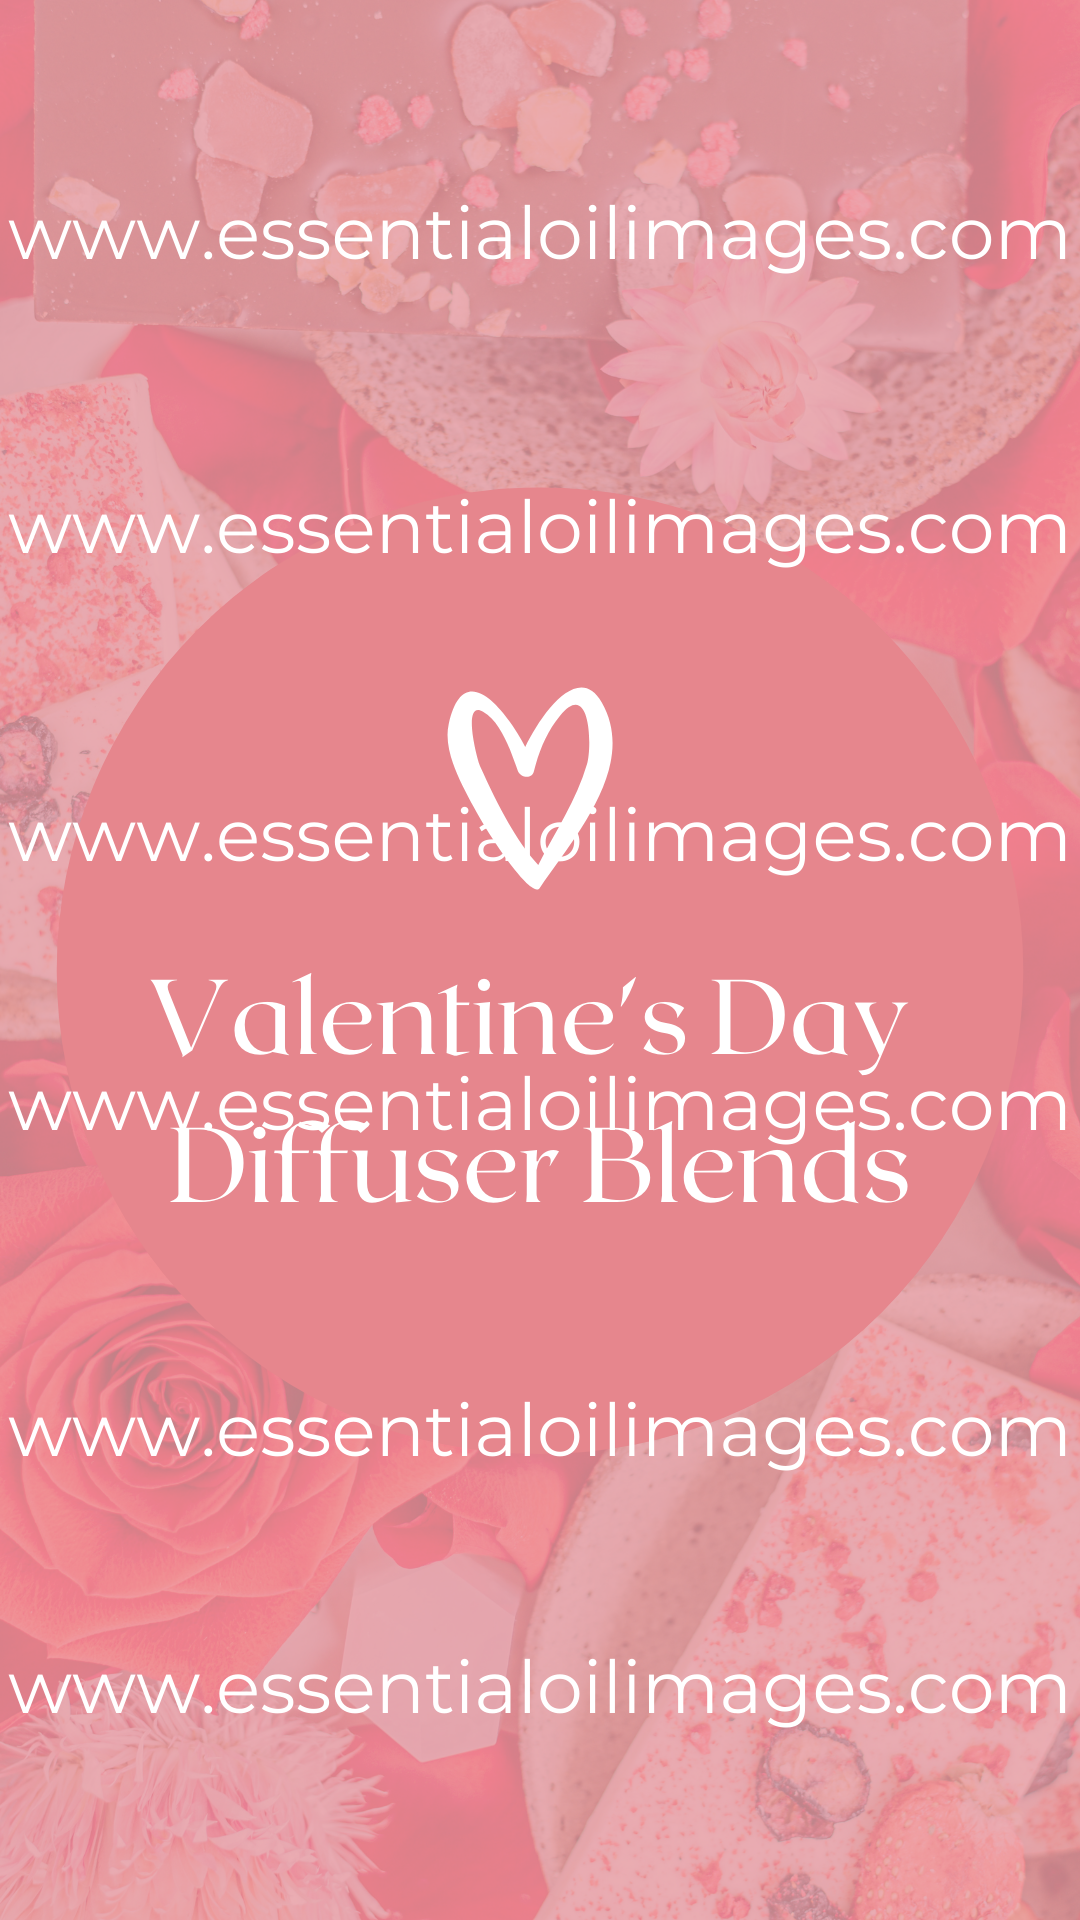 The Essential Oil Images Valentines Day Graphics Collection